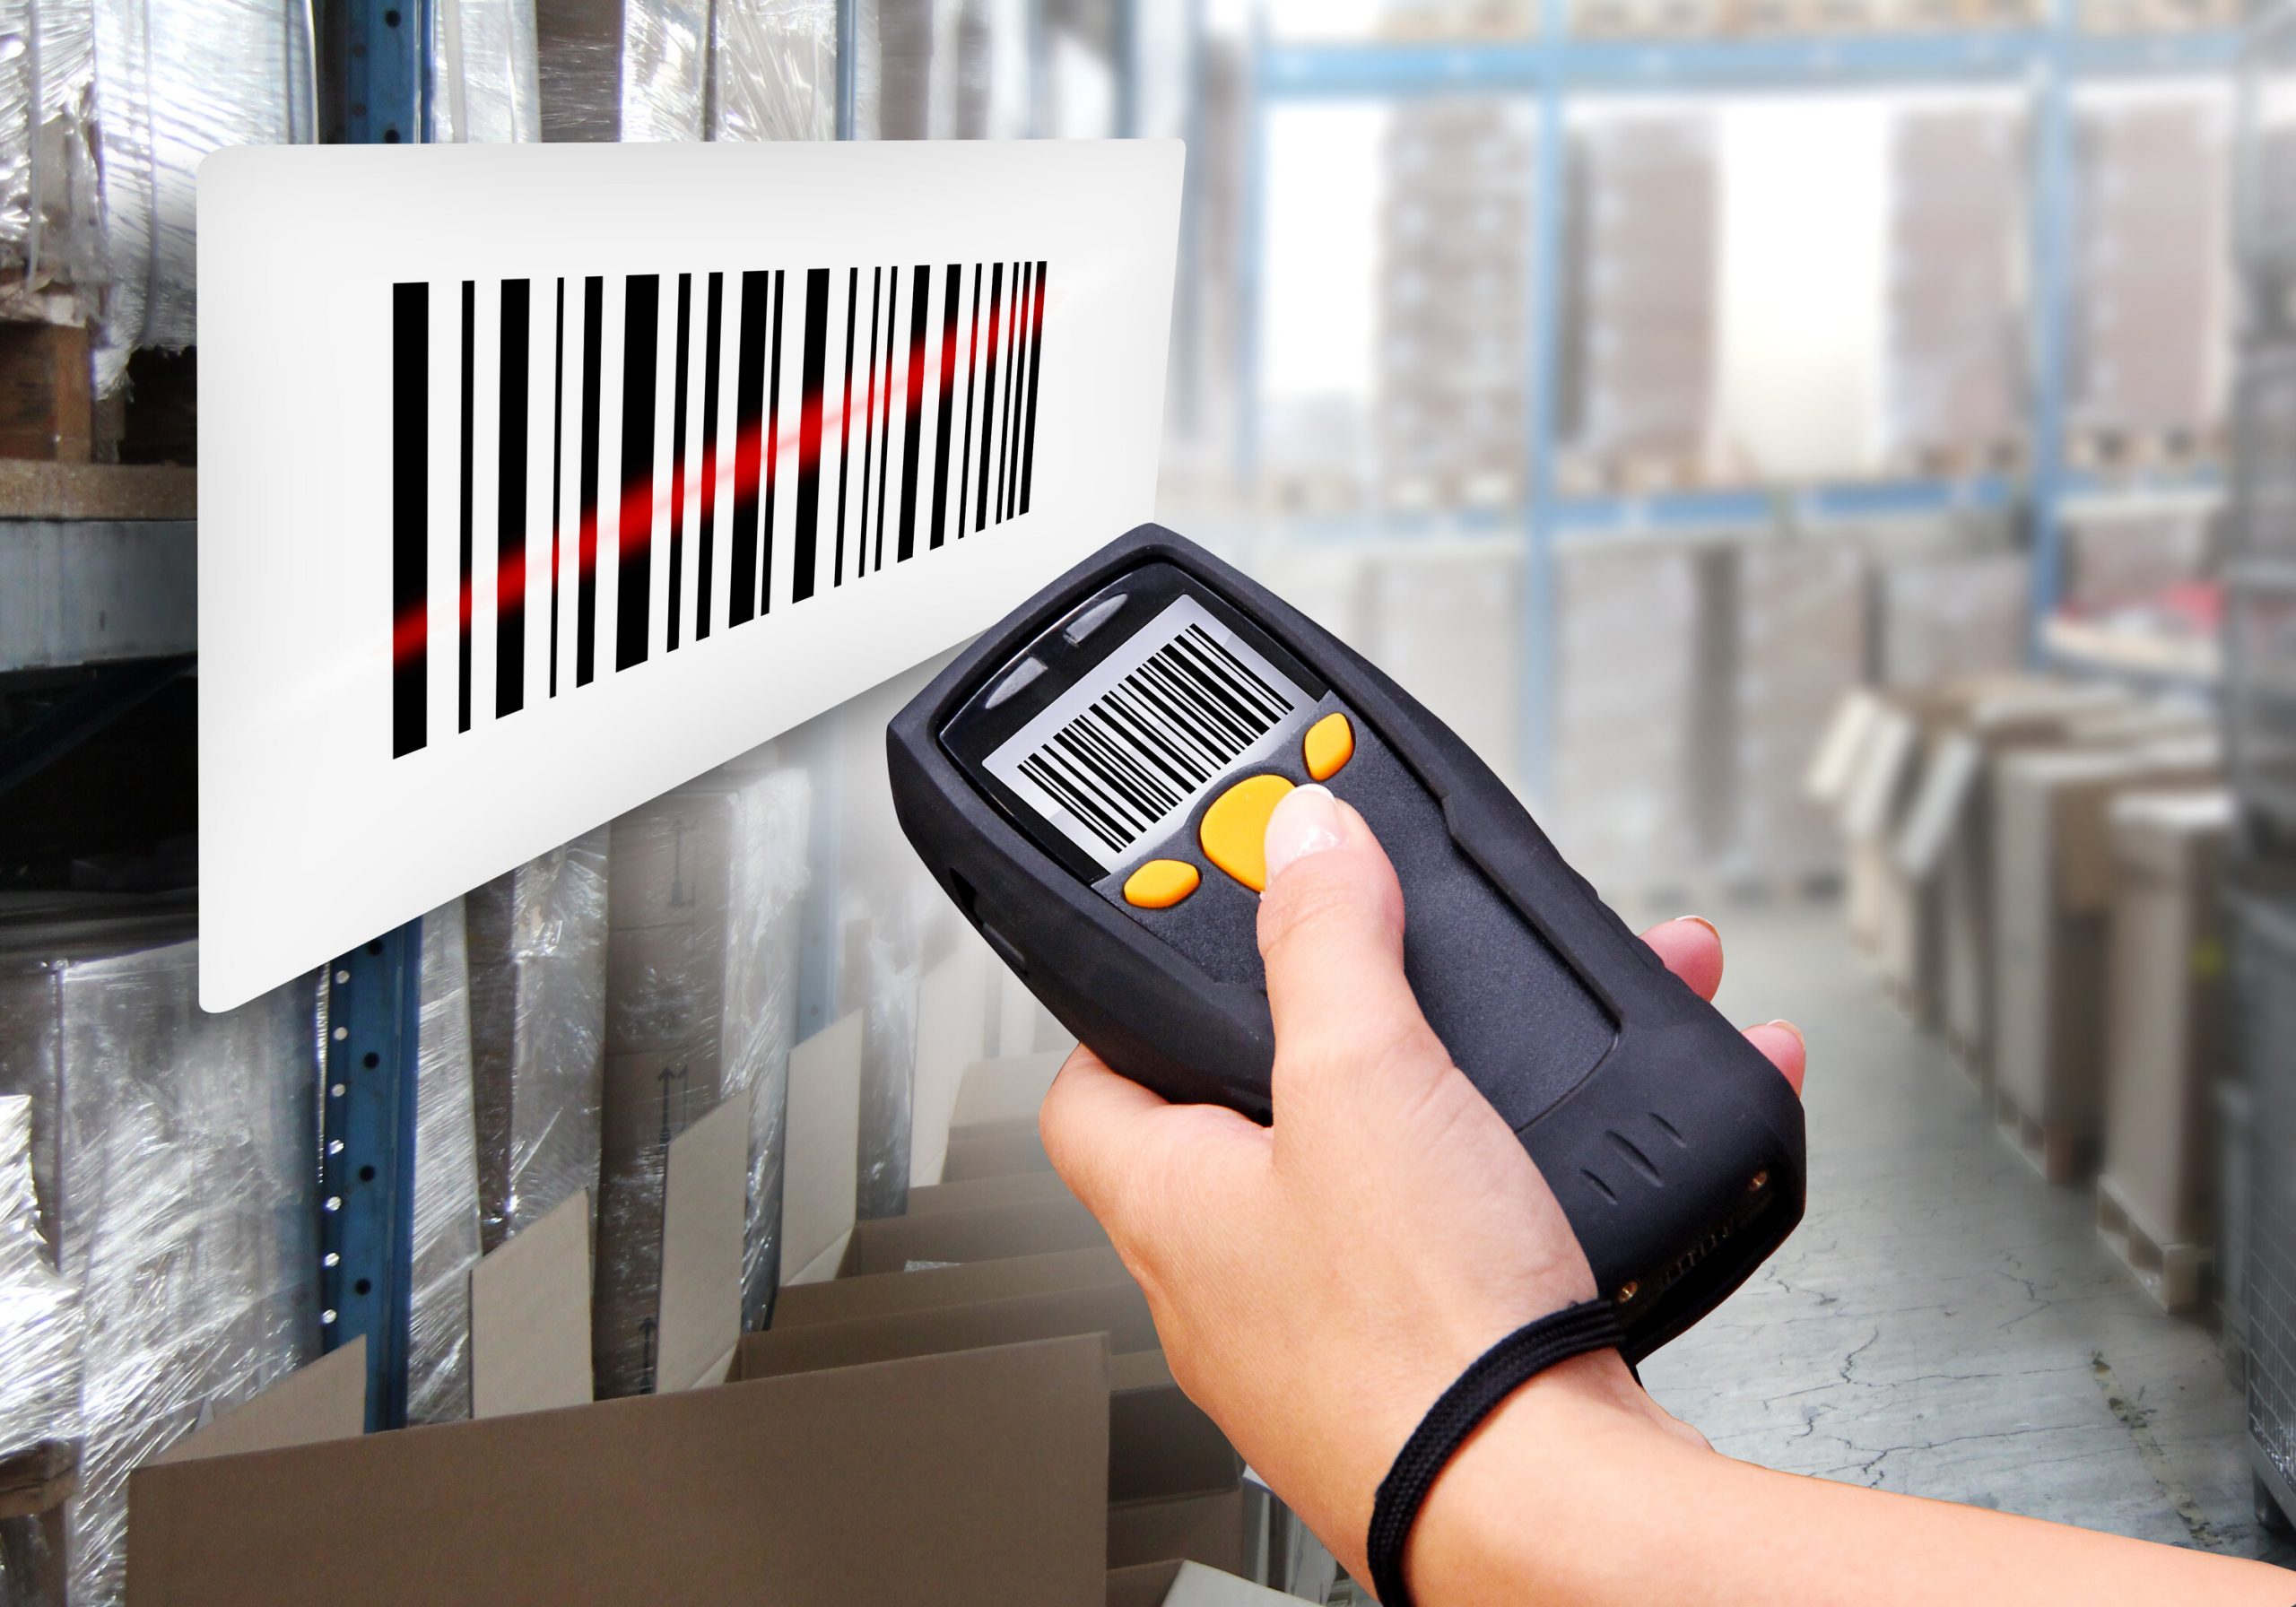 Order & Warehouse Management with EasyScan: SKU and Barcode